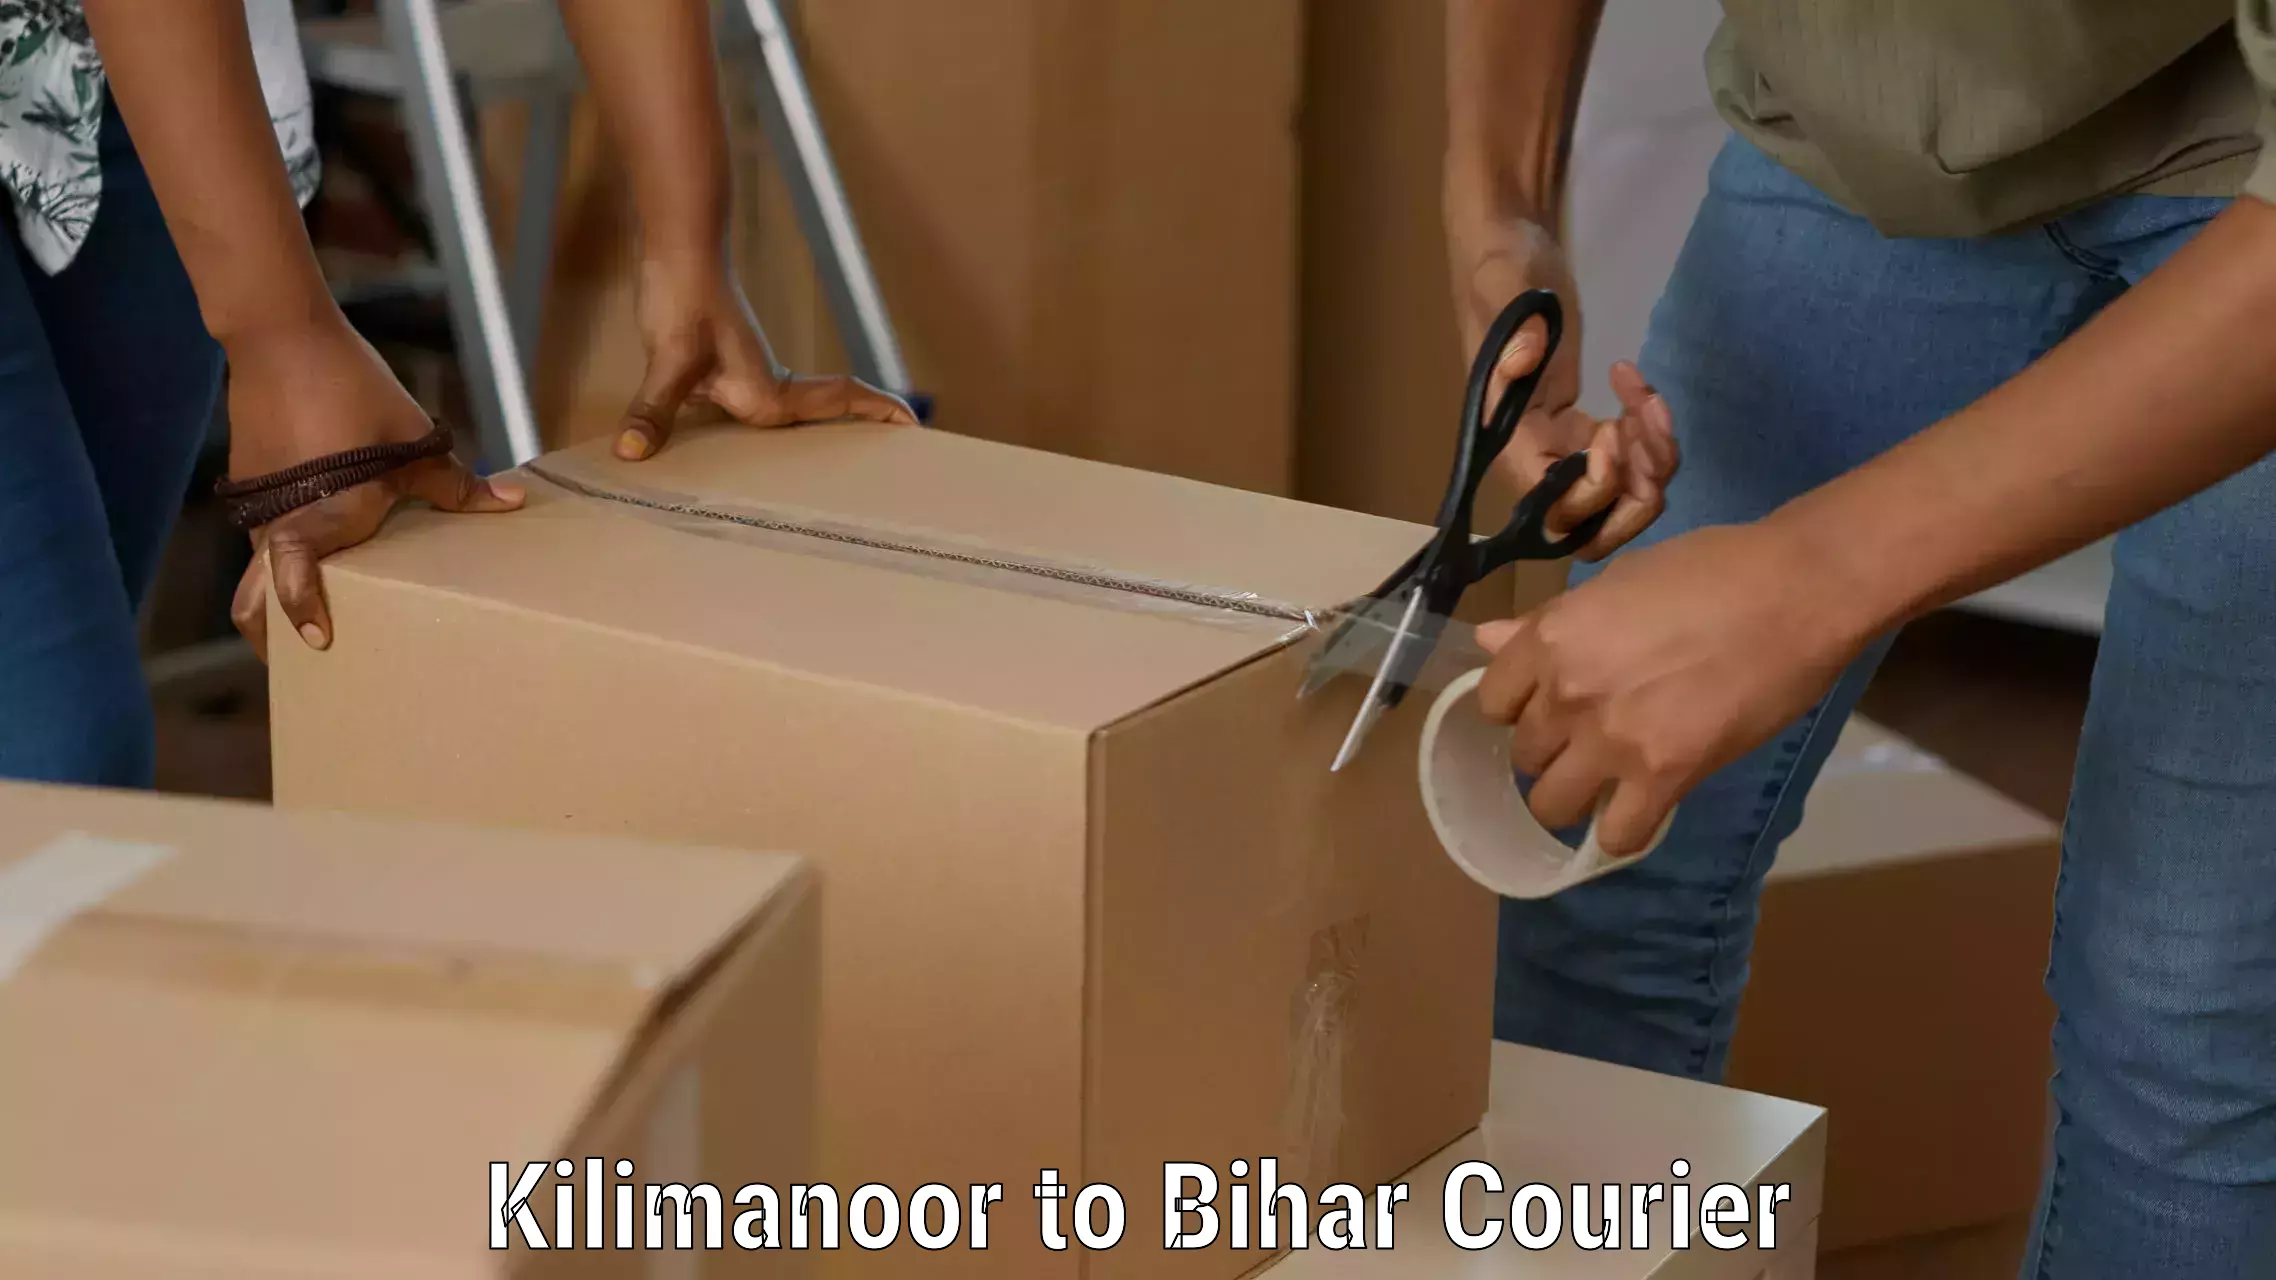 Courier service partnerships in Kilimanoor to Araria